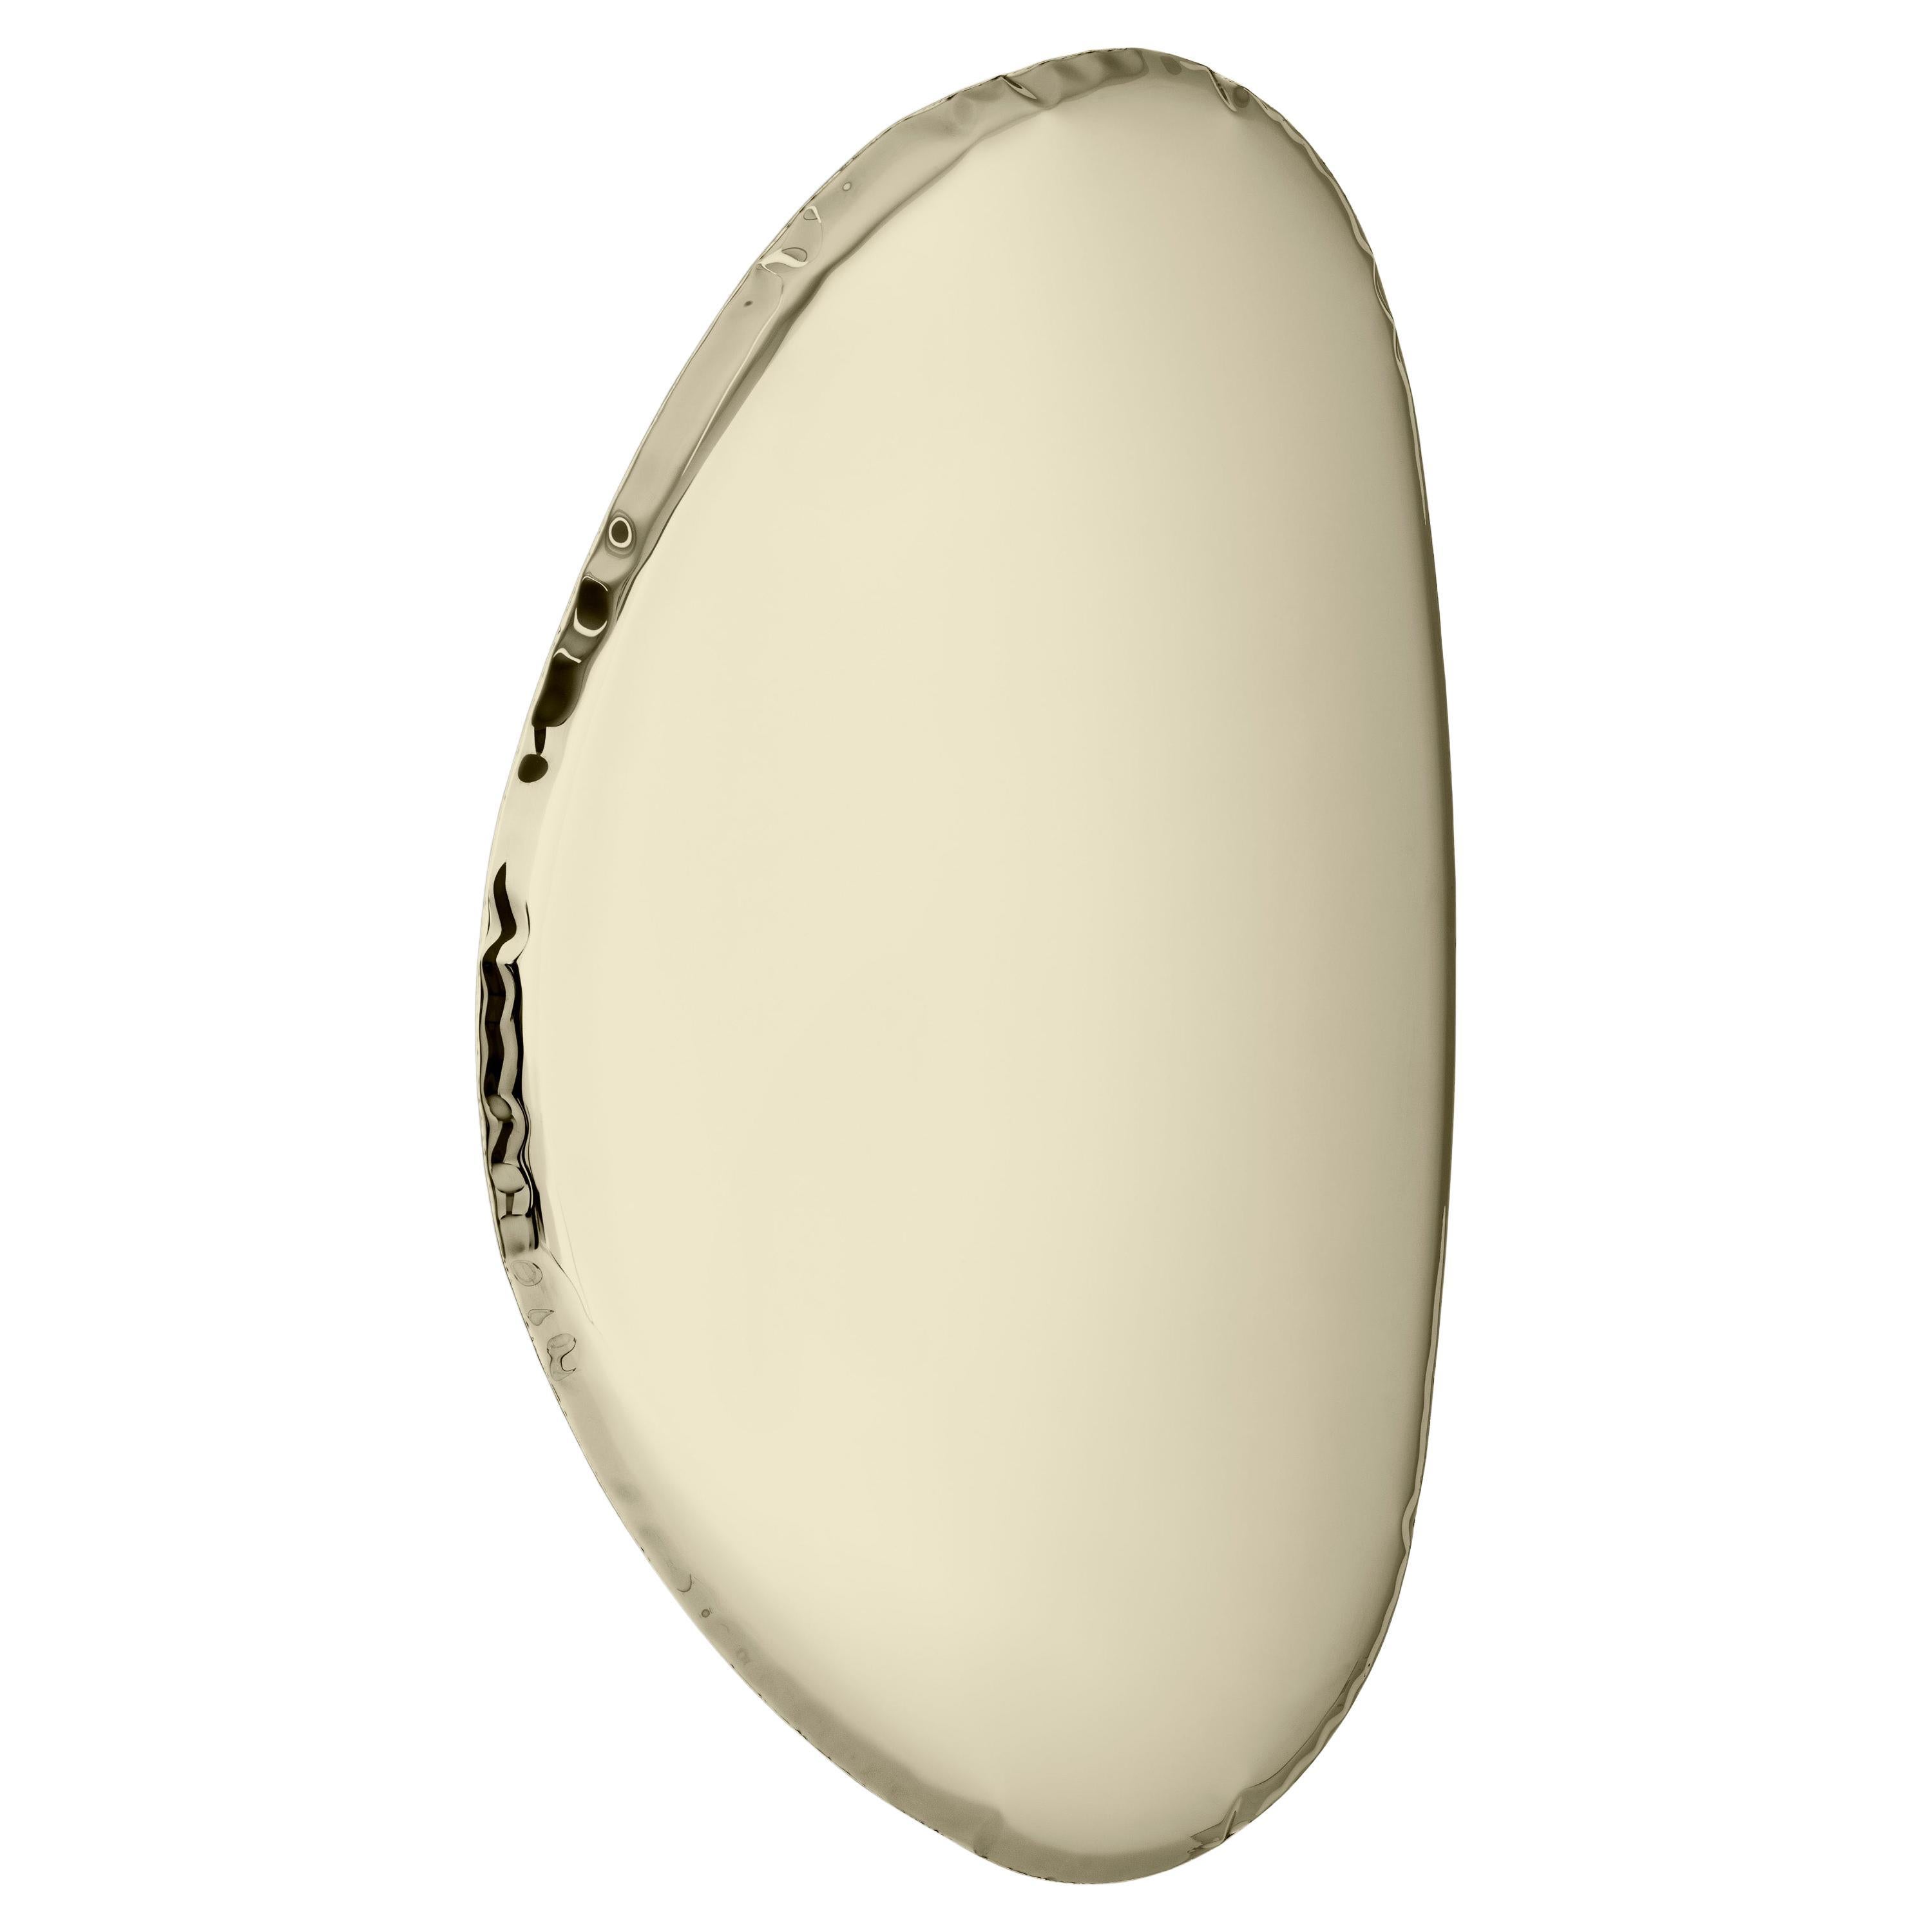 Tafla O2 Polished Stainless Steel Light Gold Color Wall Mirror by Zieta For Sale